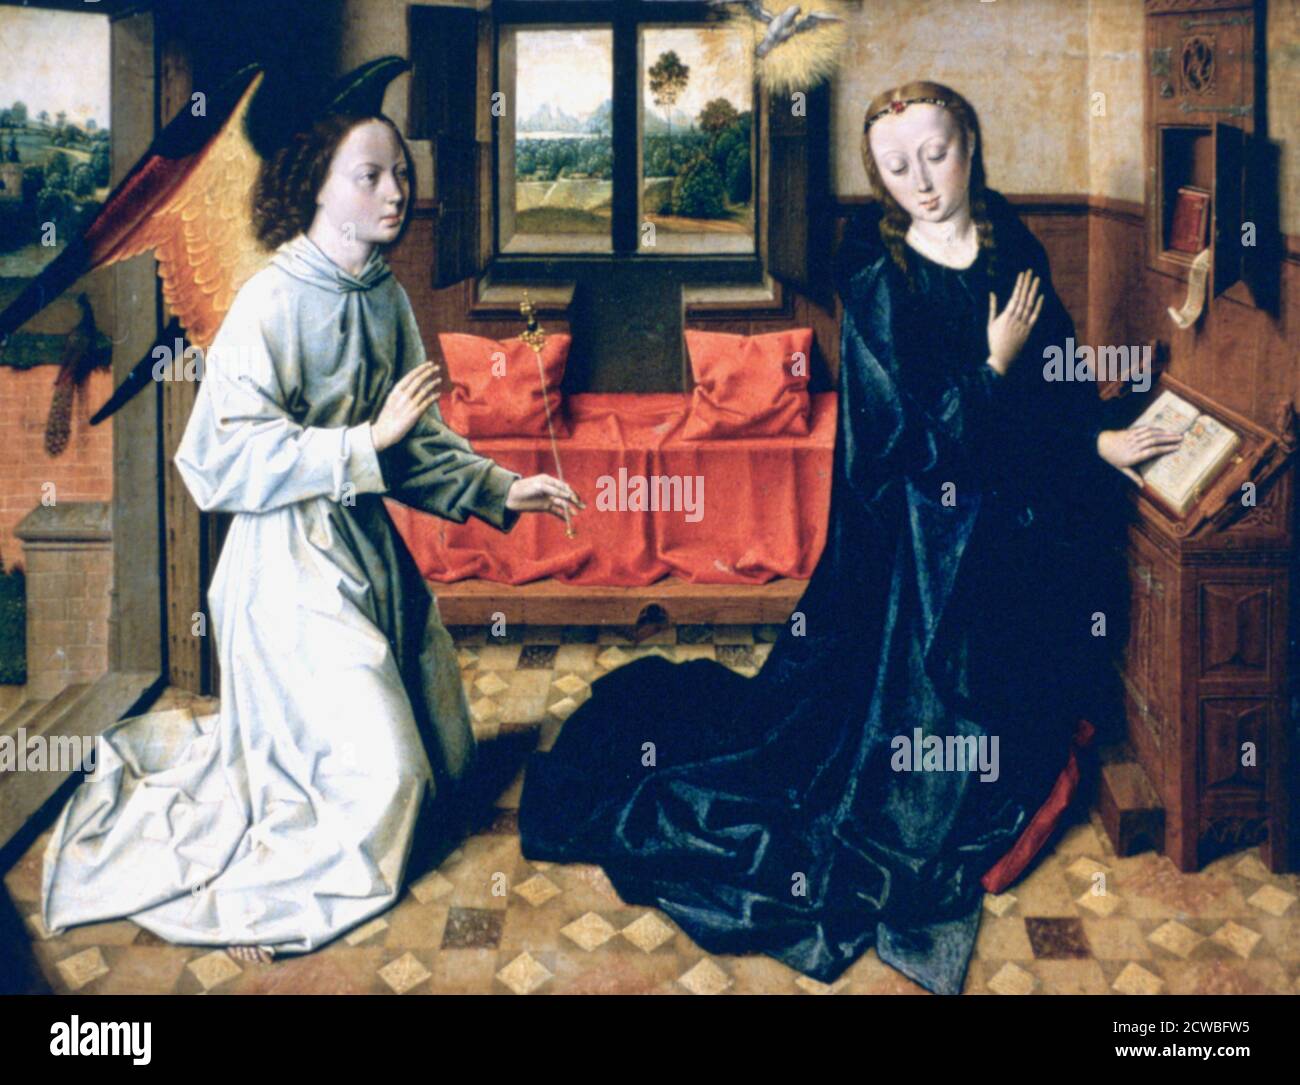 The Annunciation', 1465-1470, Artist: Dieric Bouts. Dieric Bouts (1415-1475) was an Early Netherlandish painter. Bouts may have studied under Rogier van der Weyden. Stock Photo